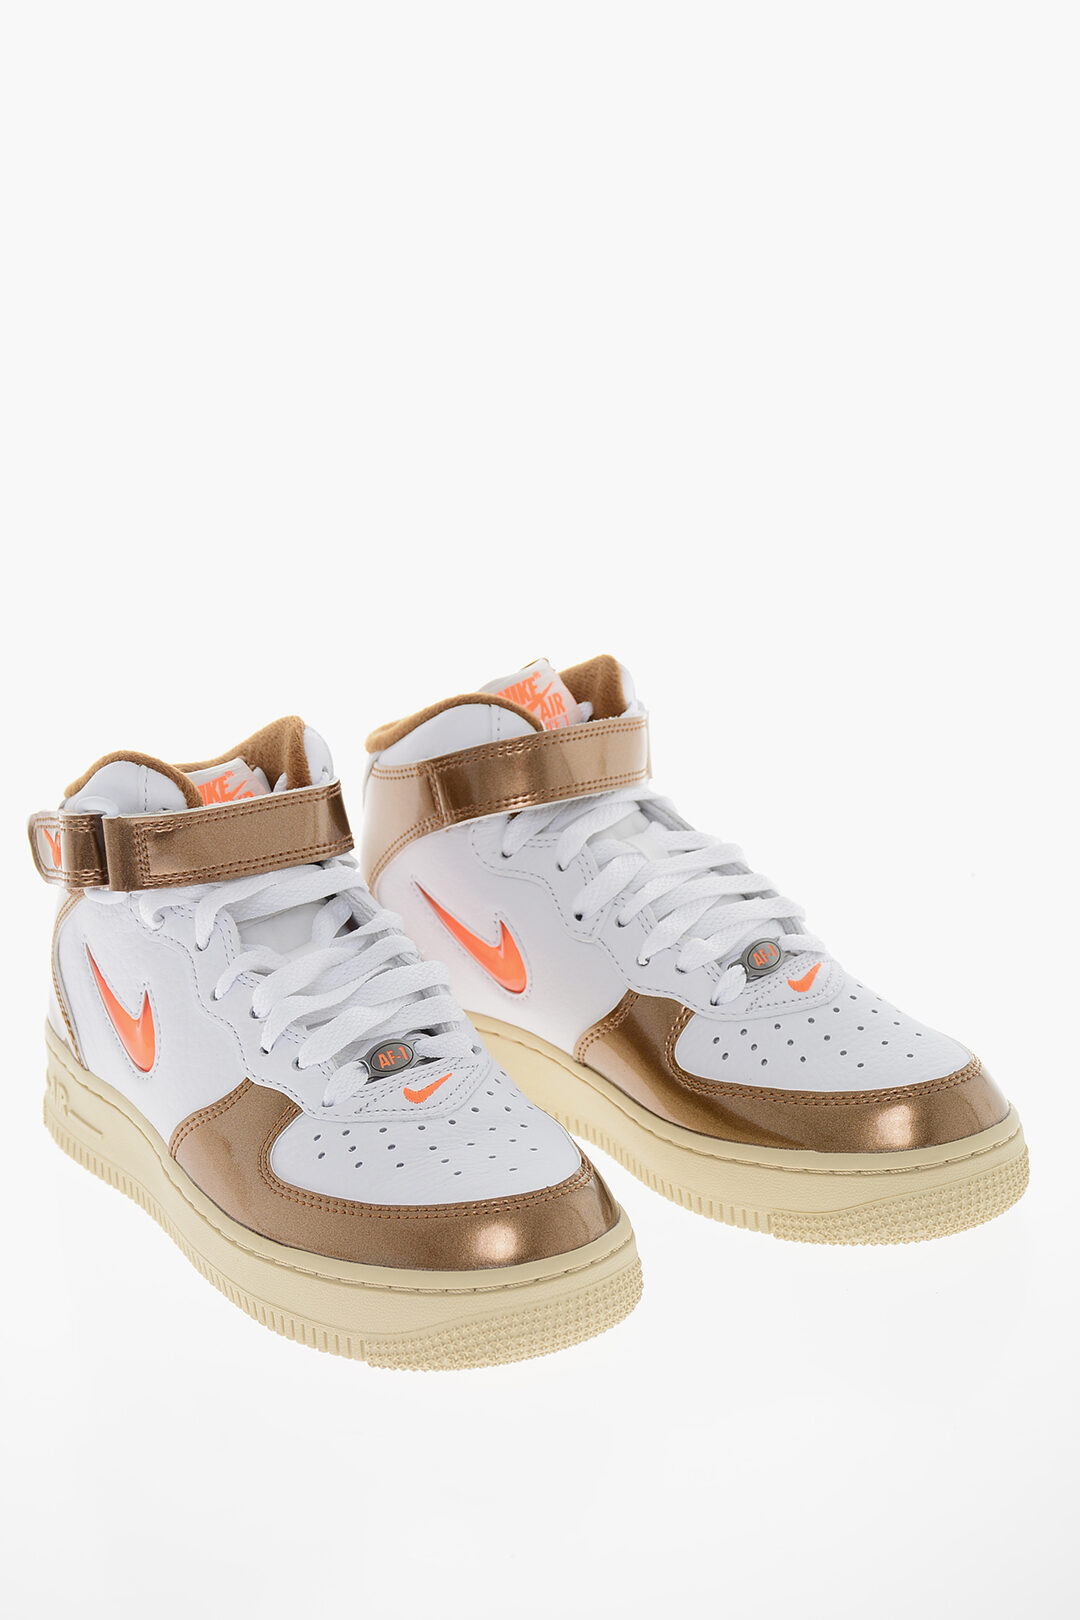 Nike Leather AIR FORCE 1 High-Top Sneakers Contrasting Details men - Glamood